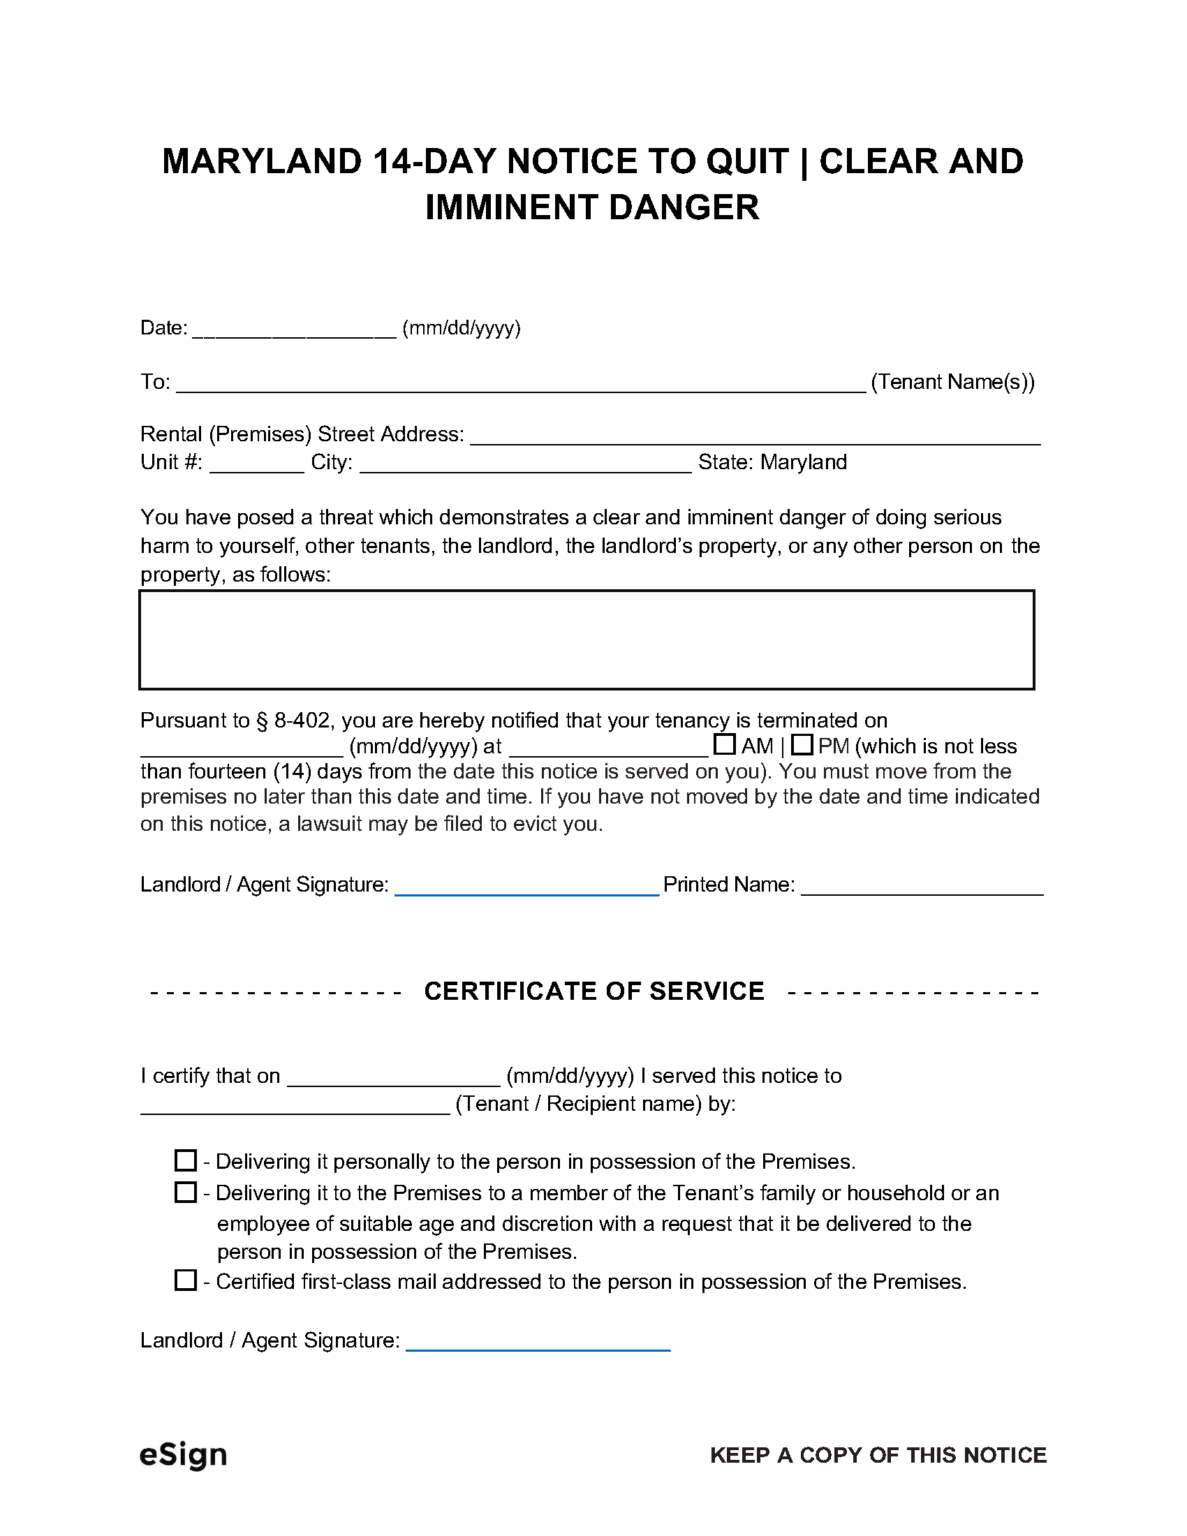 Free Maryland 14Day Notice to Quit Clear and Imminent Danger PDF